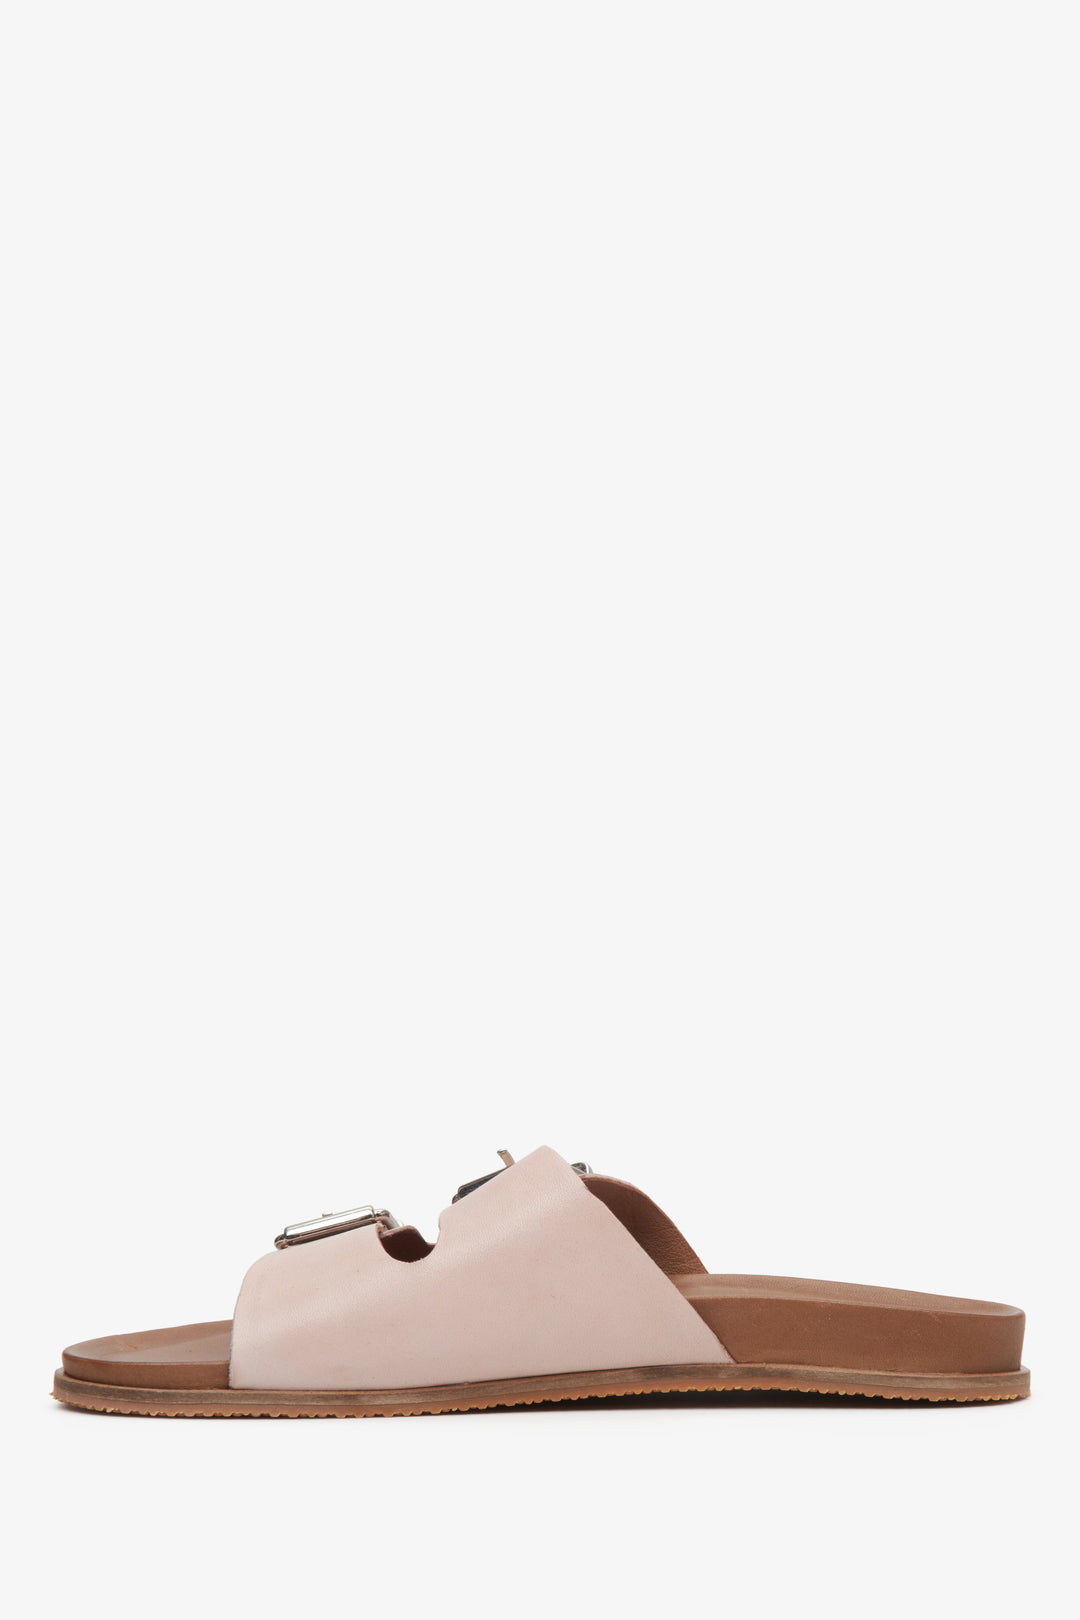 Women's pastel pink leather Estro slide sandals with thick straps - shoe profile.